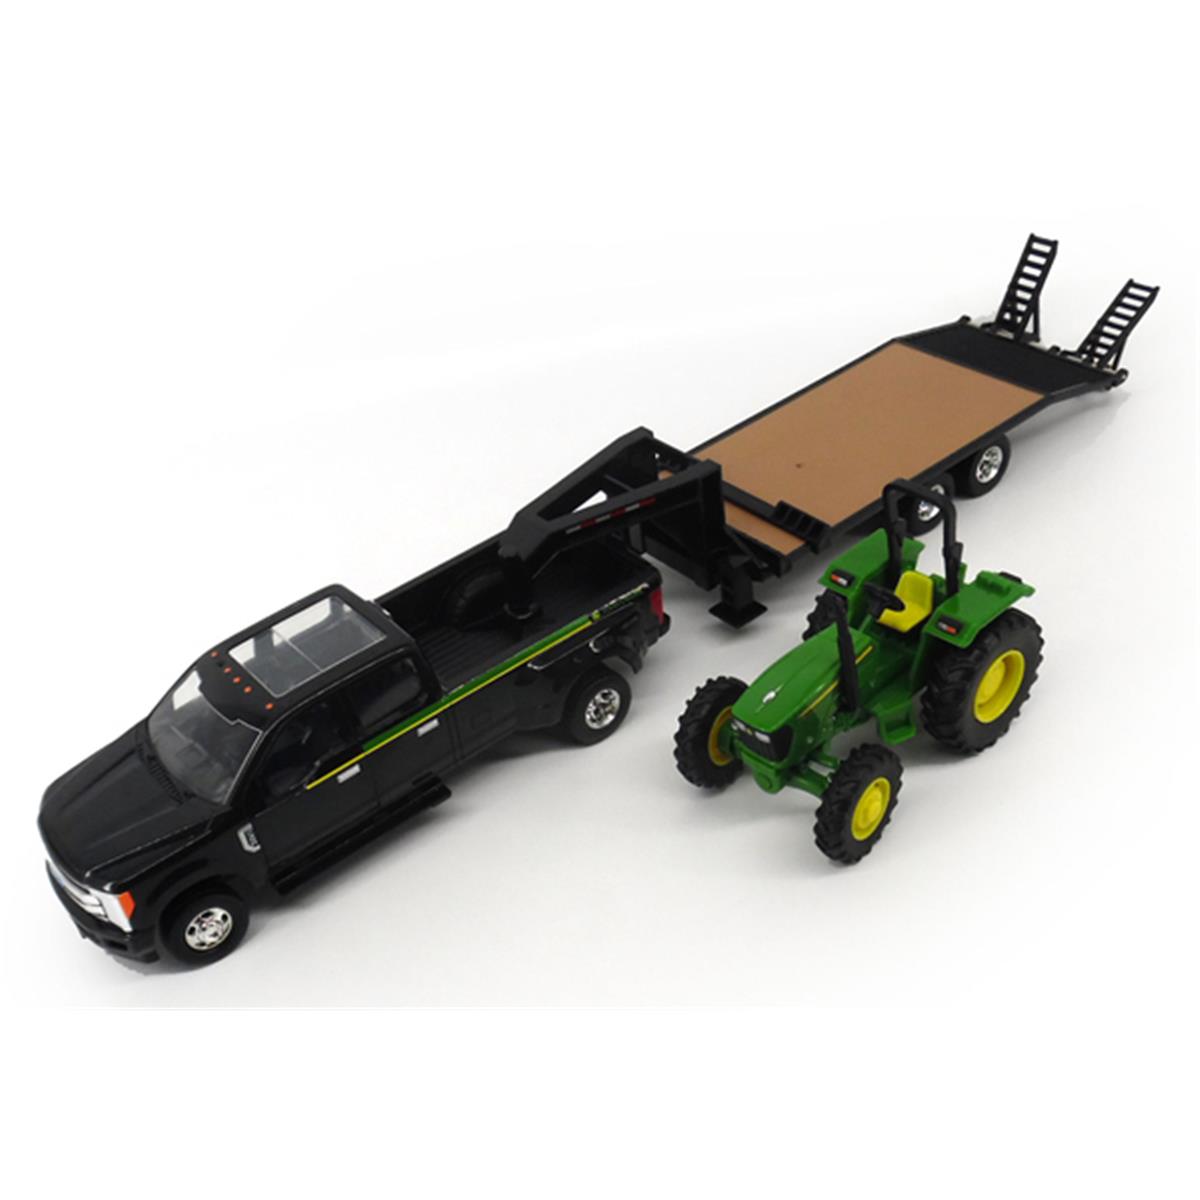 John Deere Dealership Ford F-350 With Trailer Hauling A John Deere 5075e Tractor, 8 Years Above